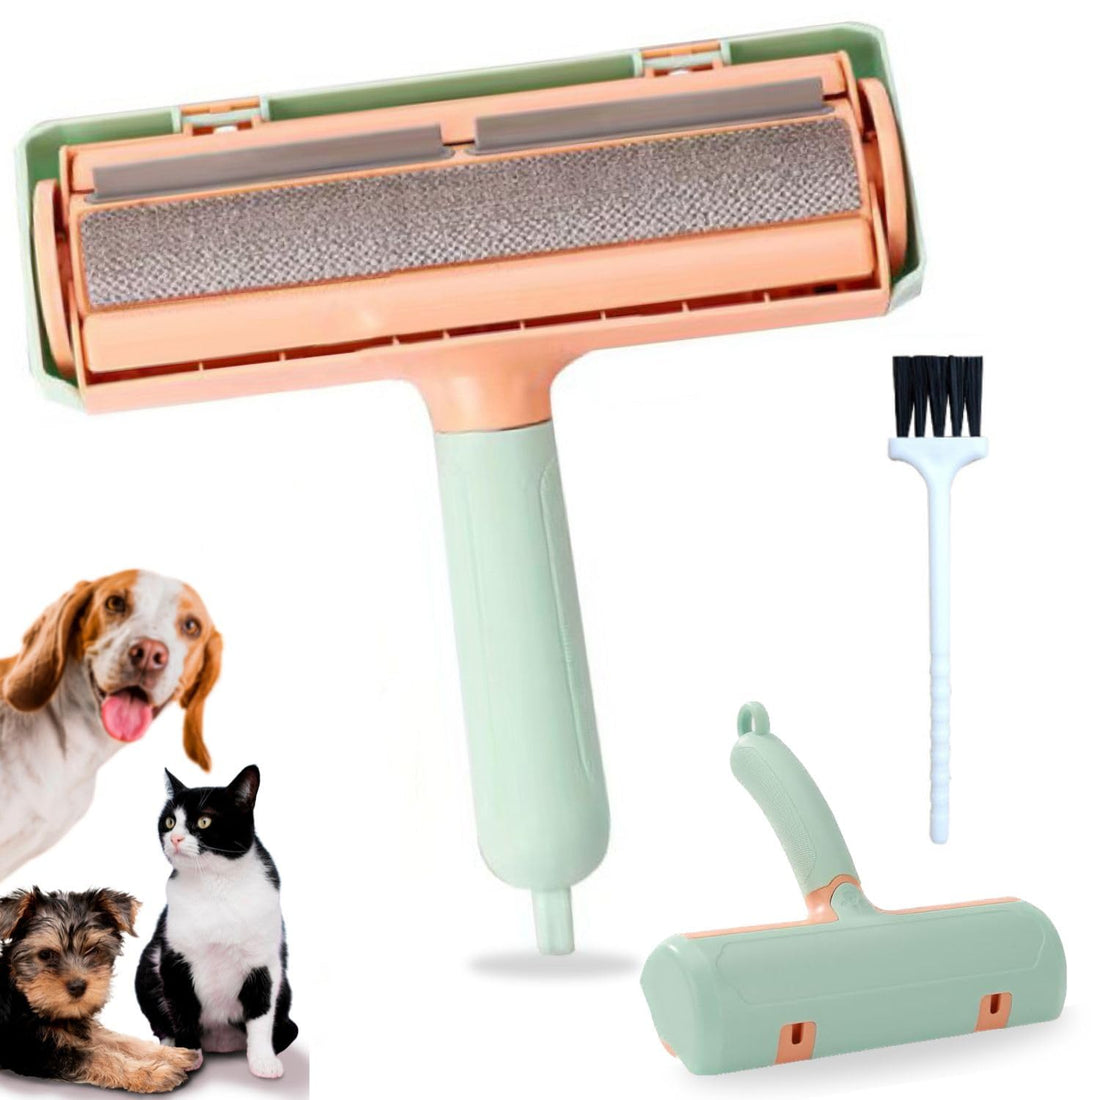 Between Pets - Pet Hair Remover Roller - Reusable Lint Roller for Furniture, Couch, Carpet, Clothing and Bedding - Effortlessly Remove Dog and Cat Hair - Portable Fur Removal Tool (Green/Orange)